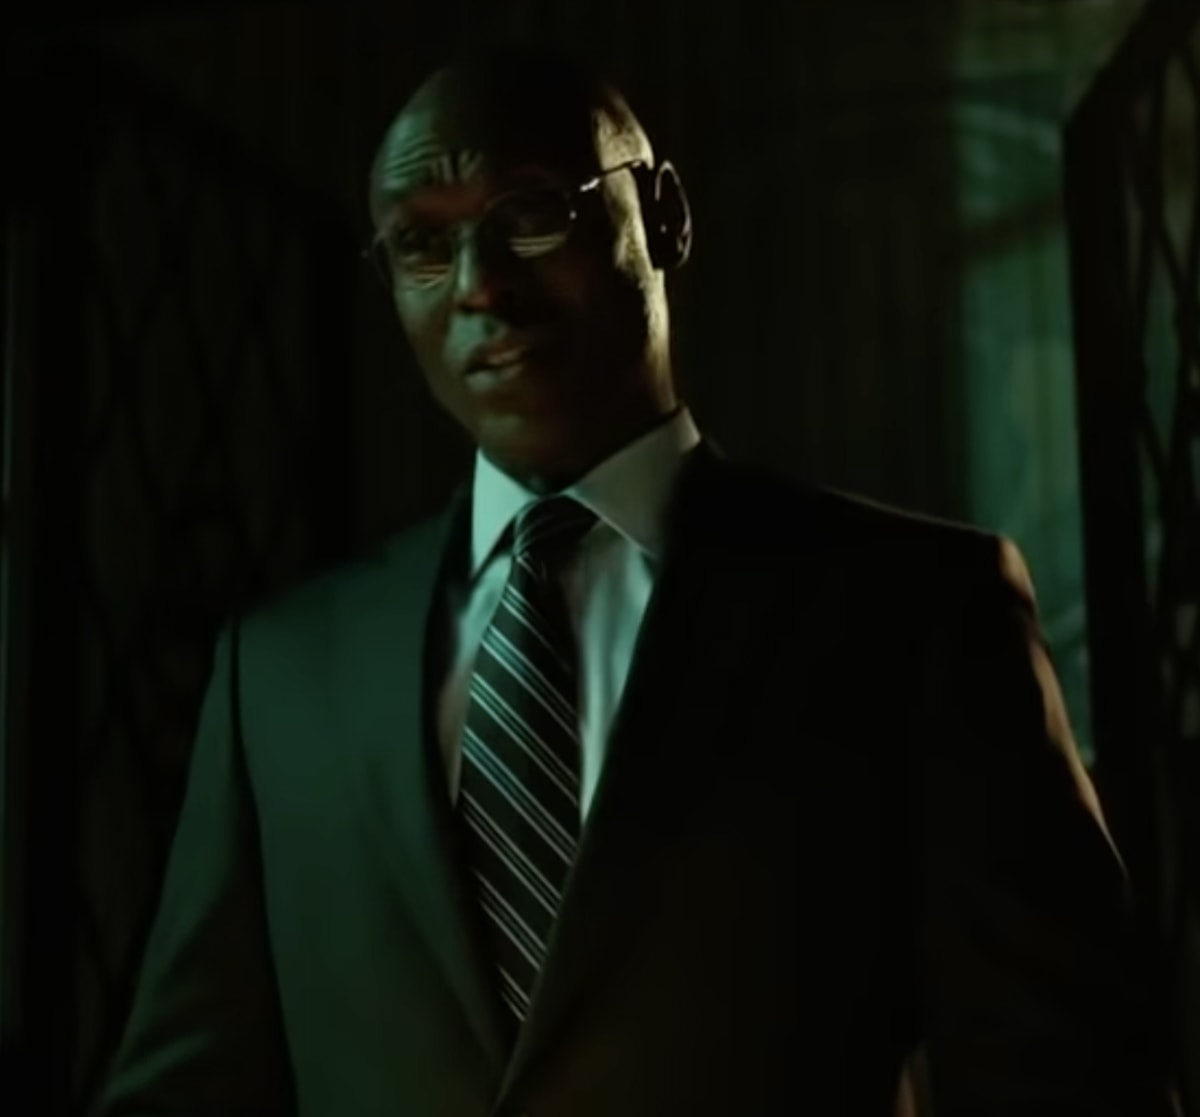 Lance Reddick will reprise his role as Charon in the John Wick spin-off Ballerina, set to premiere in 2024